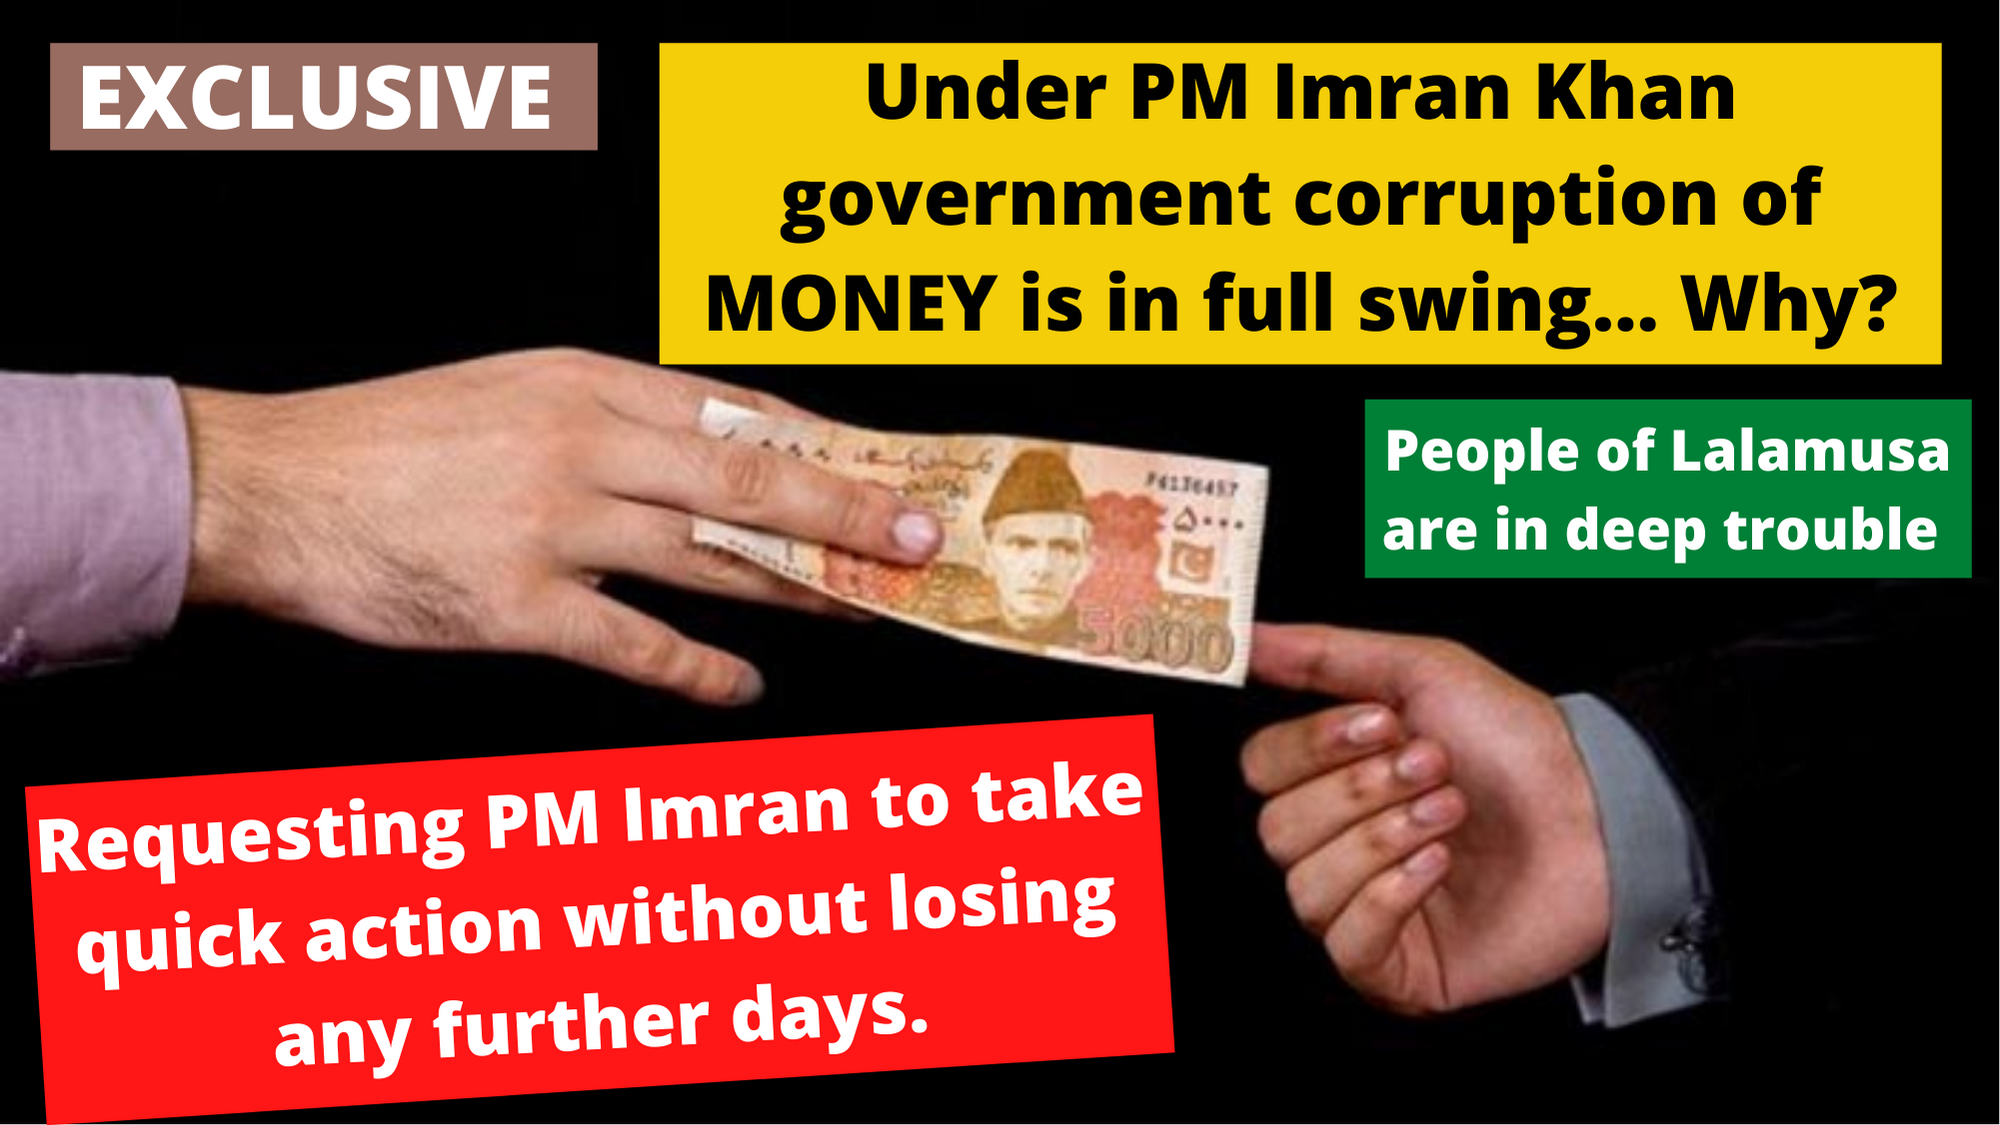 EXCLUSIVE: Under PM Imran Khan government corruption of MONEY is in full swing... Why?